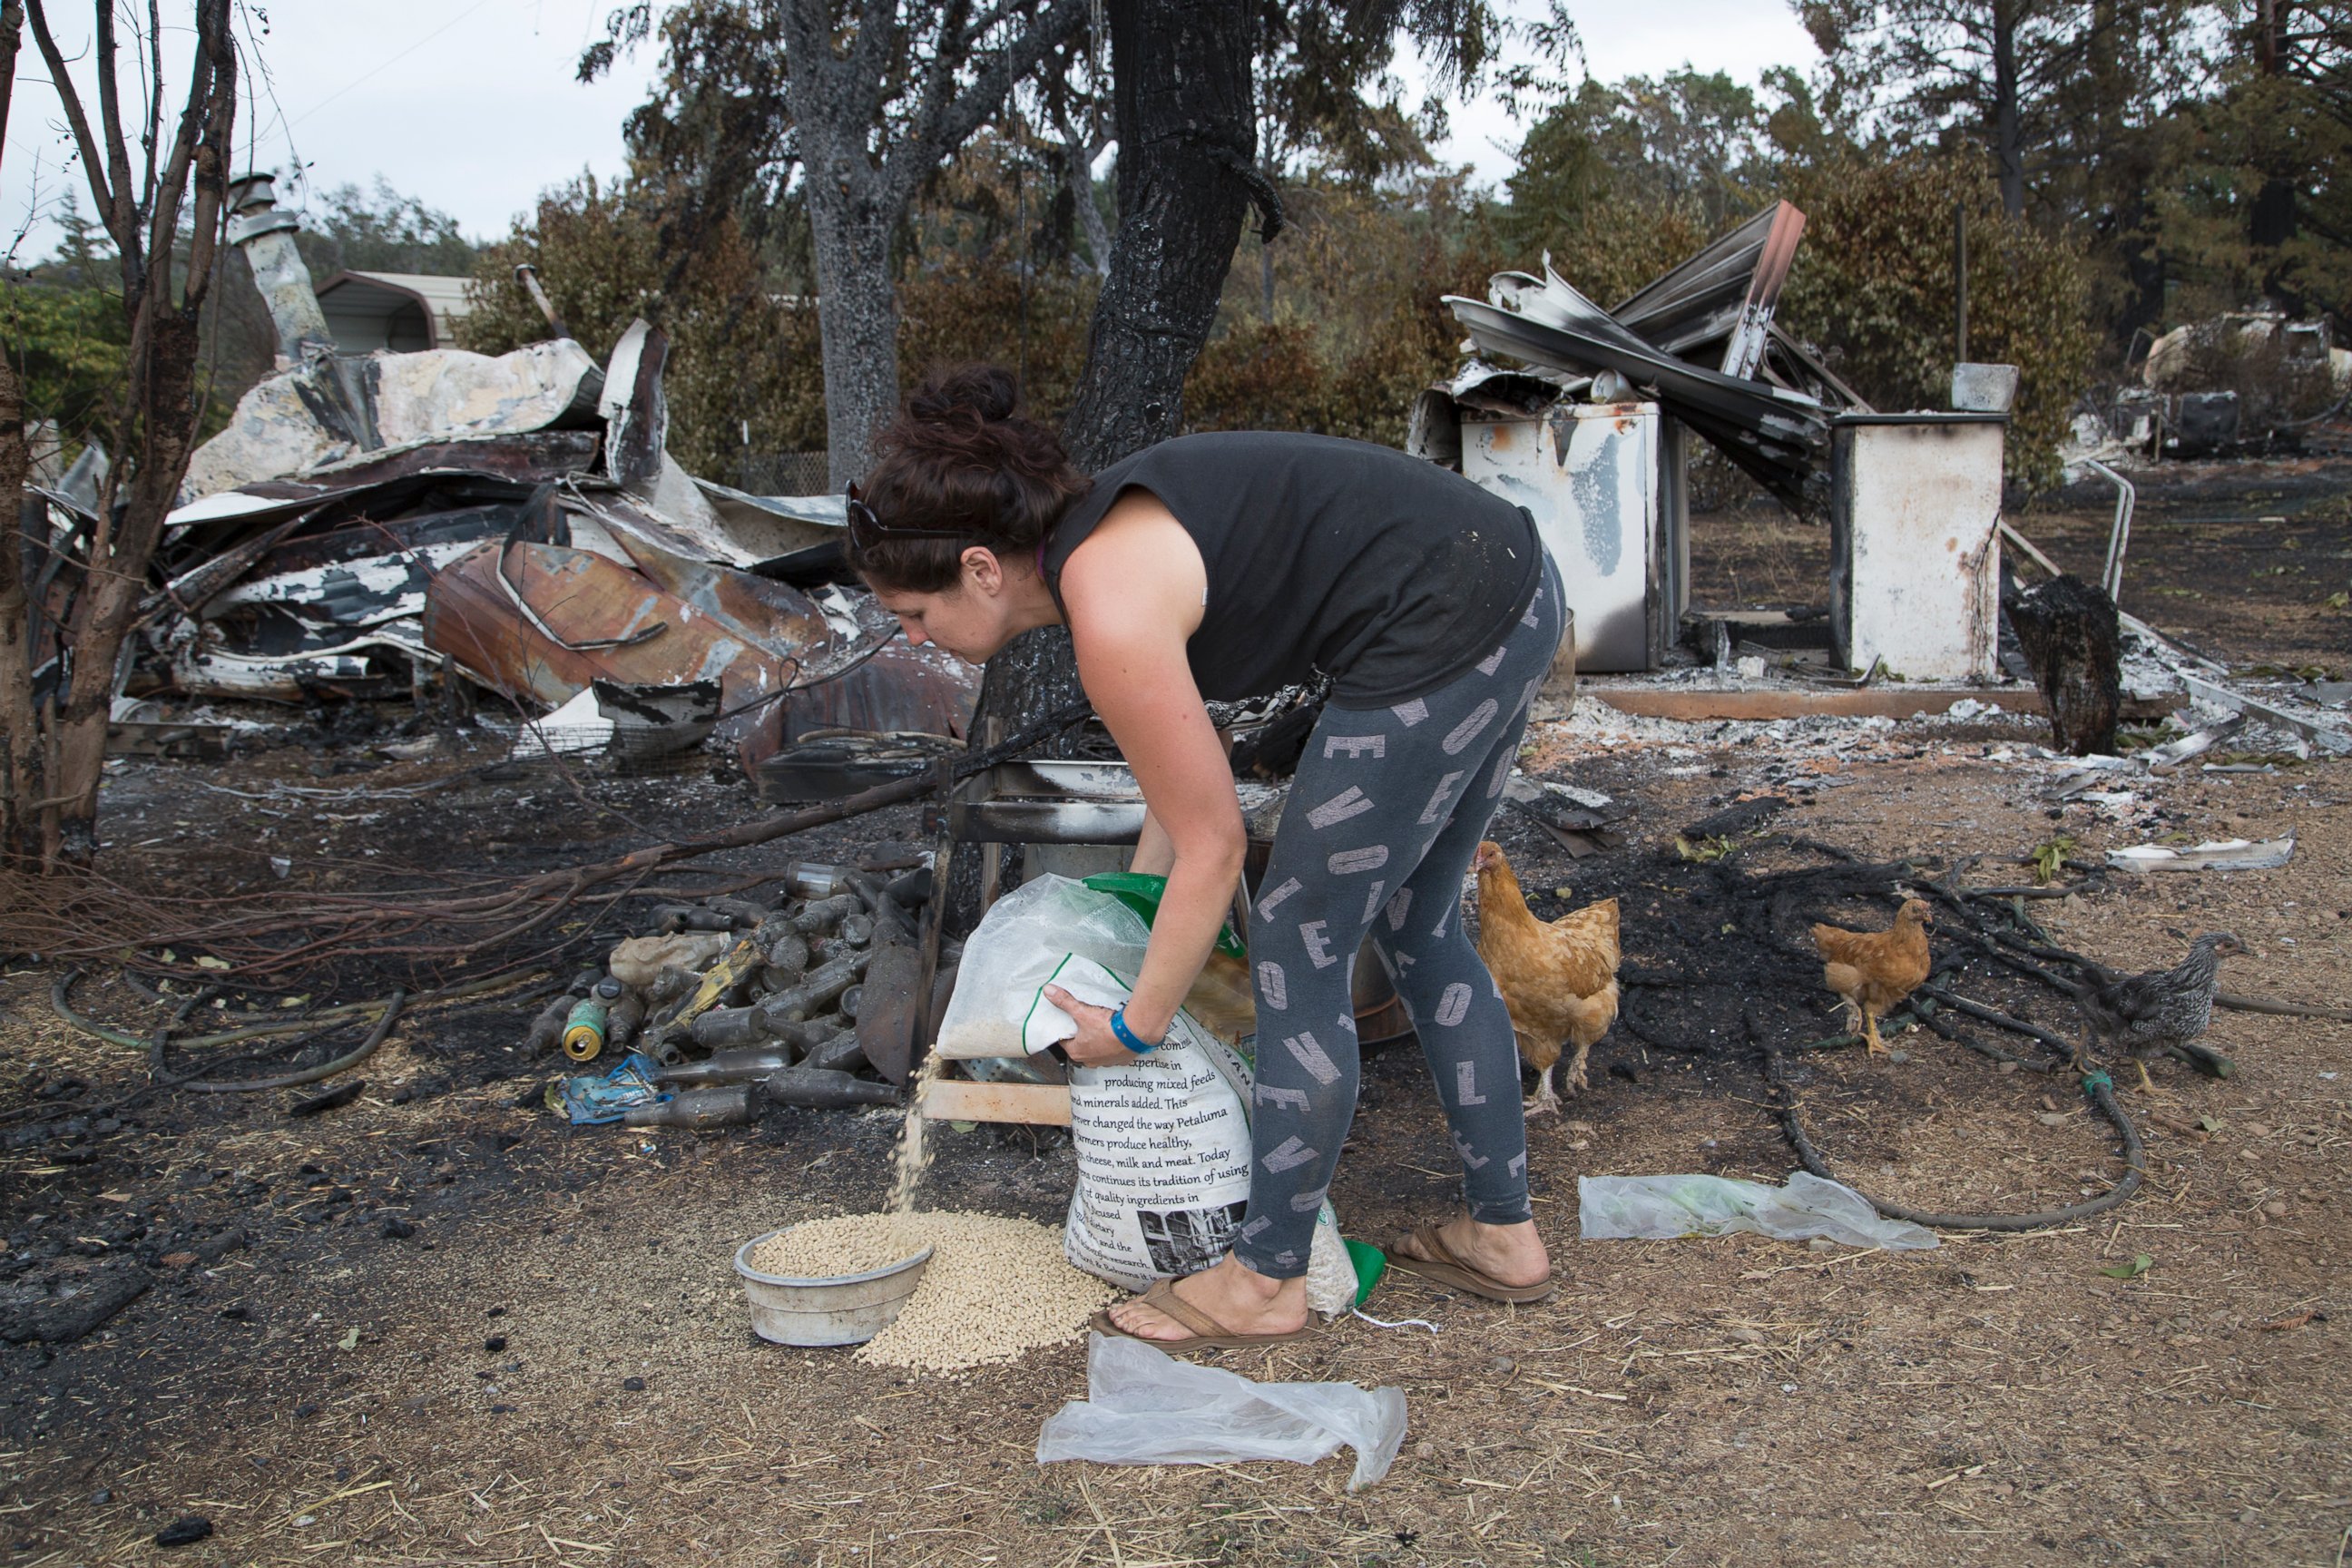 PHOTO: MIDDLETOWN, CA - SEPTEMBER 15:  Chandra Woodhouse feeds her chickens next to the ruins of her house, which burned in the Valley Fire, on September 15, 2015 in Middletown, California. 